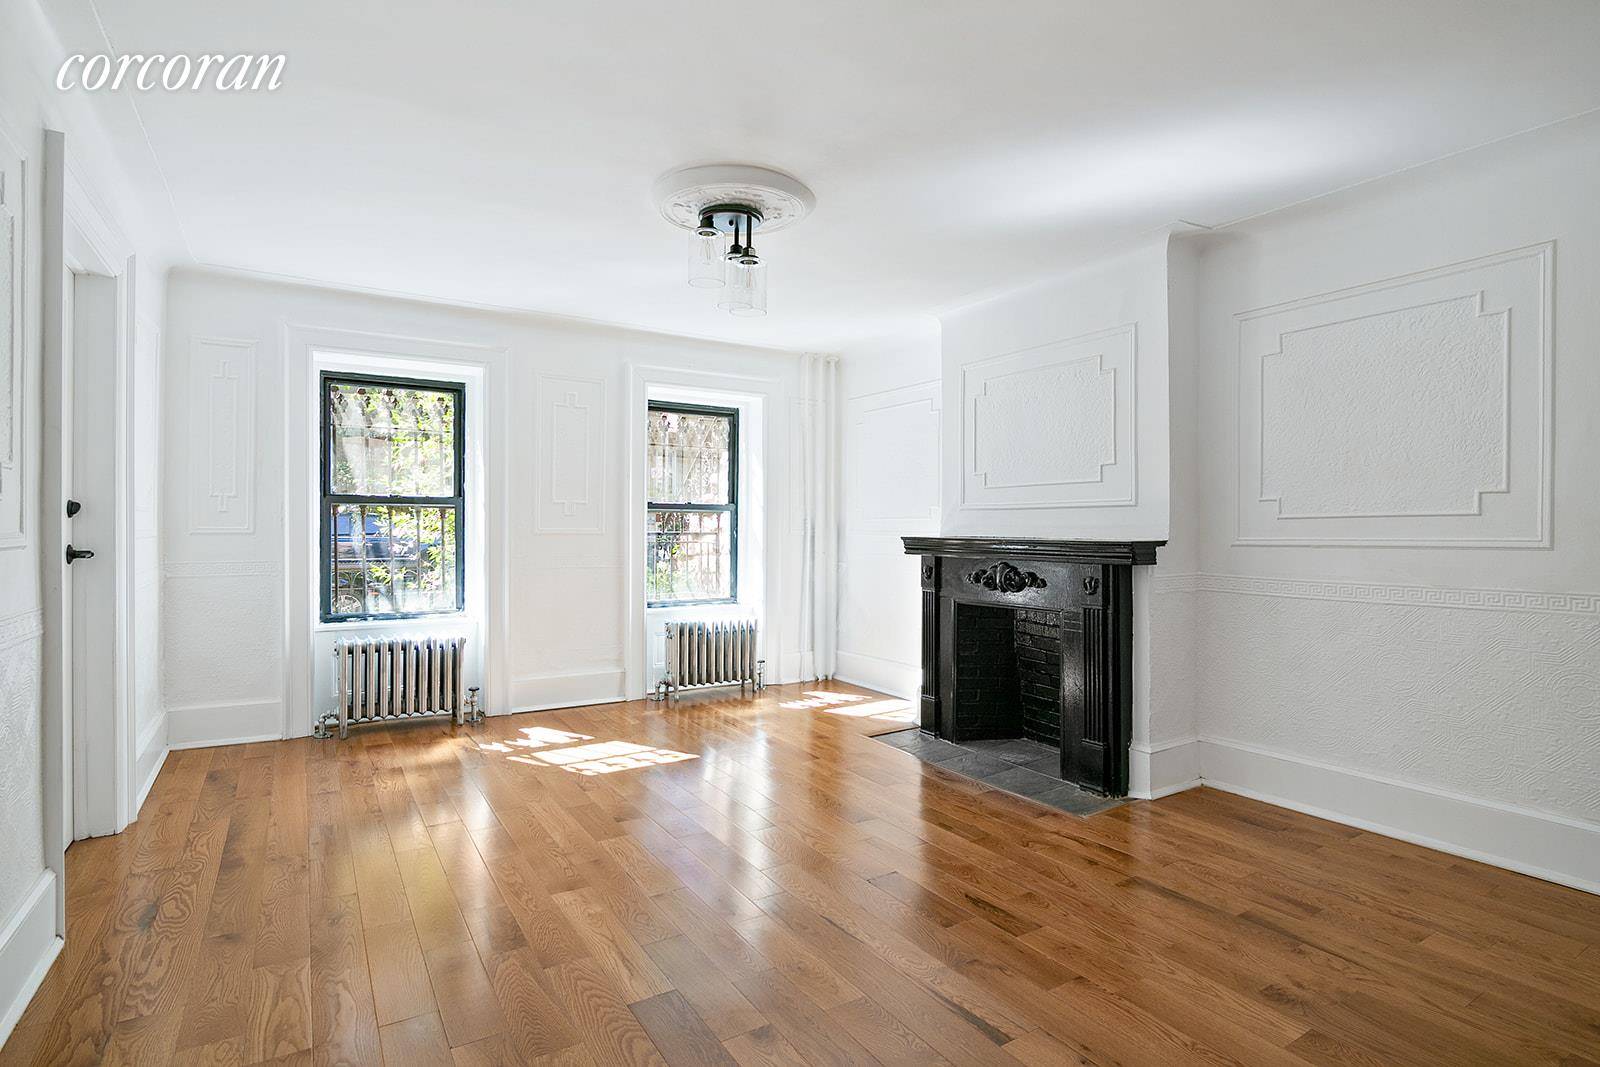 93 PILLING STREET, TOWNHOUSE, EAST BUSHWICK, BROOKLYN JUST RENOVATED 20' WIDE 2 UNITS 3 FLOORS BROWNSTONE FIRST SHOWING BY APPT ONLY AT THE OPEN HOUSE ON SUNDAY FROM 3 30 ...